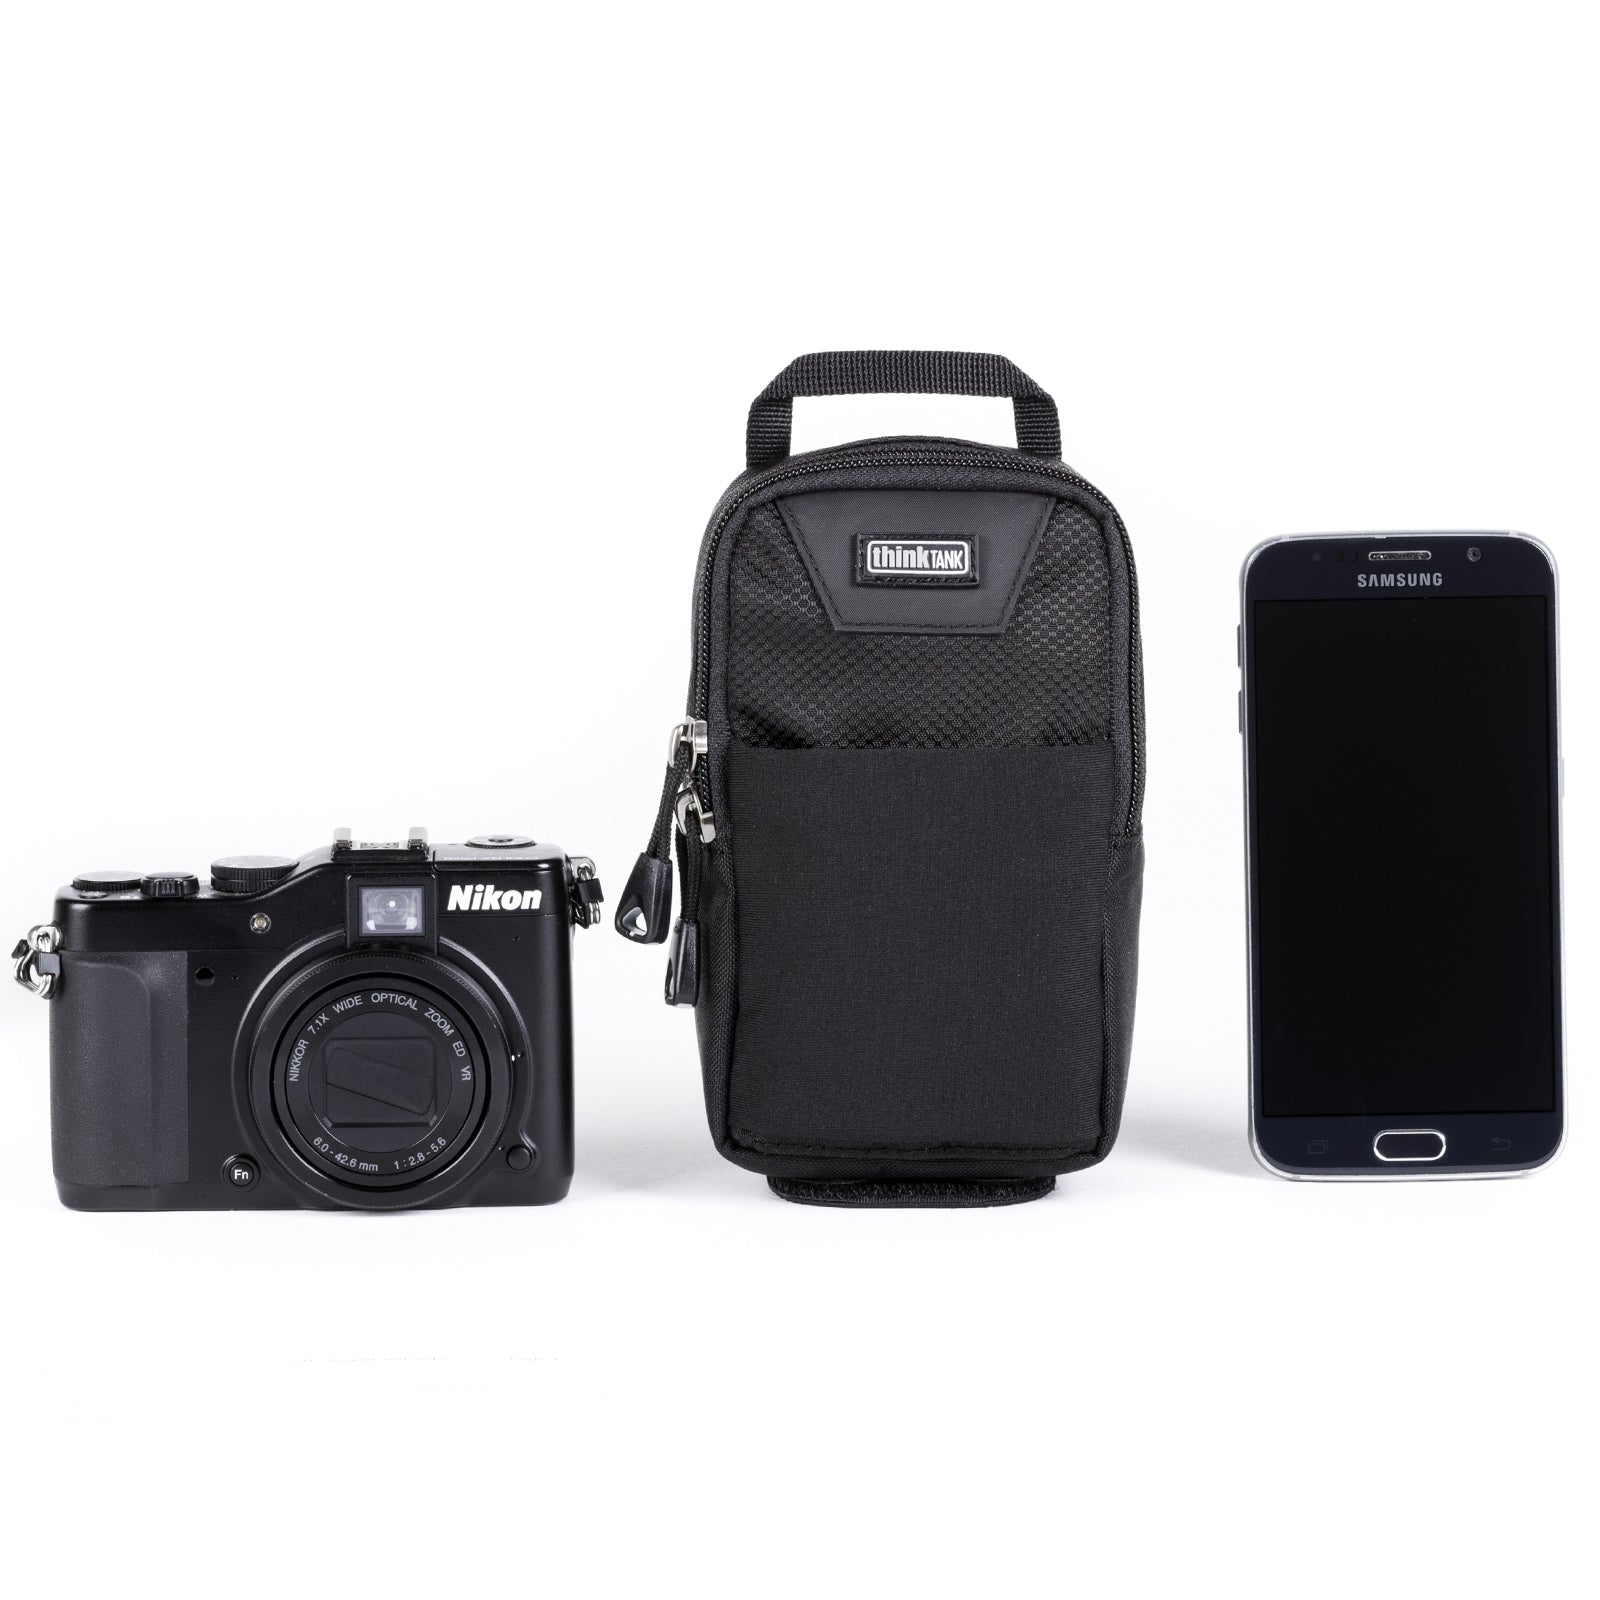 Carries a smartphone, professional point and shoot camera, etc